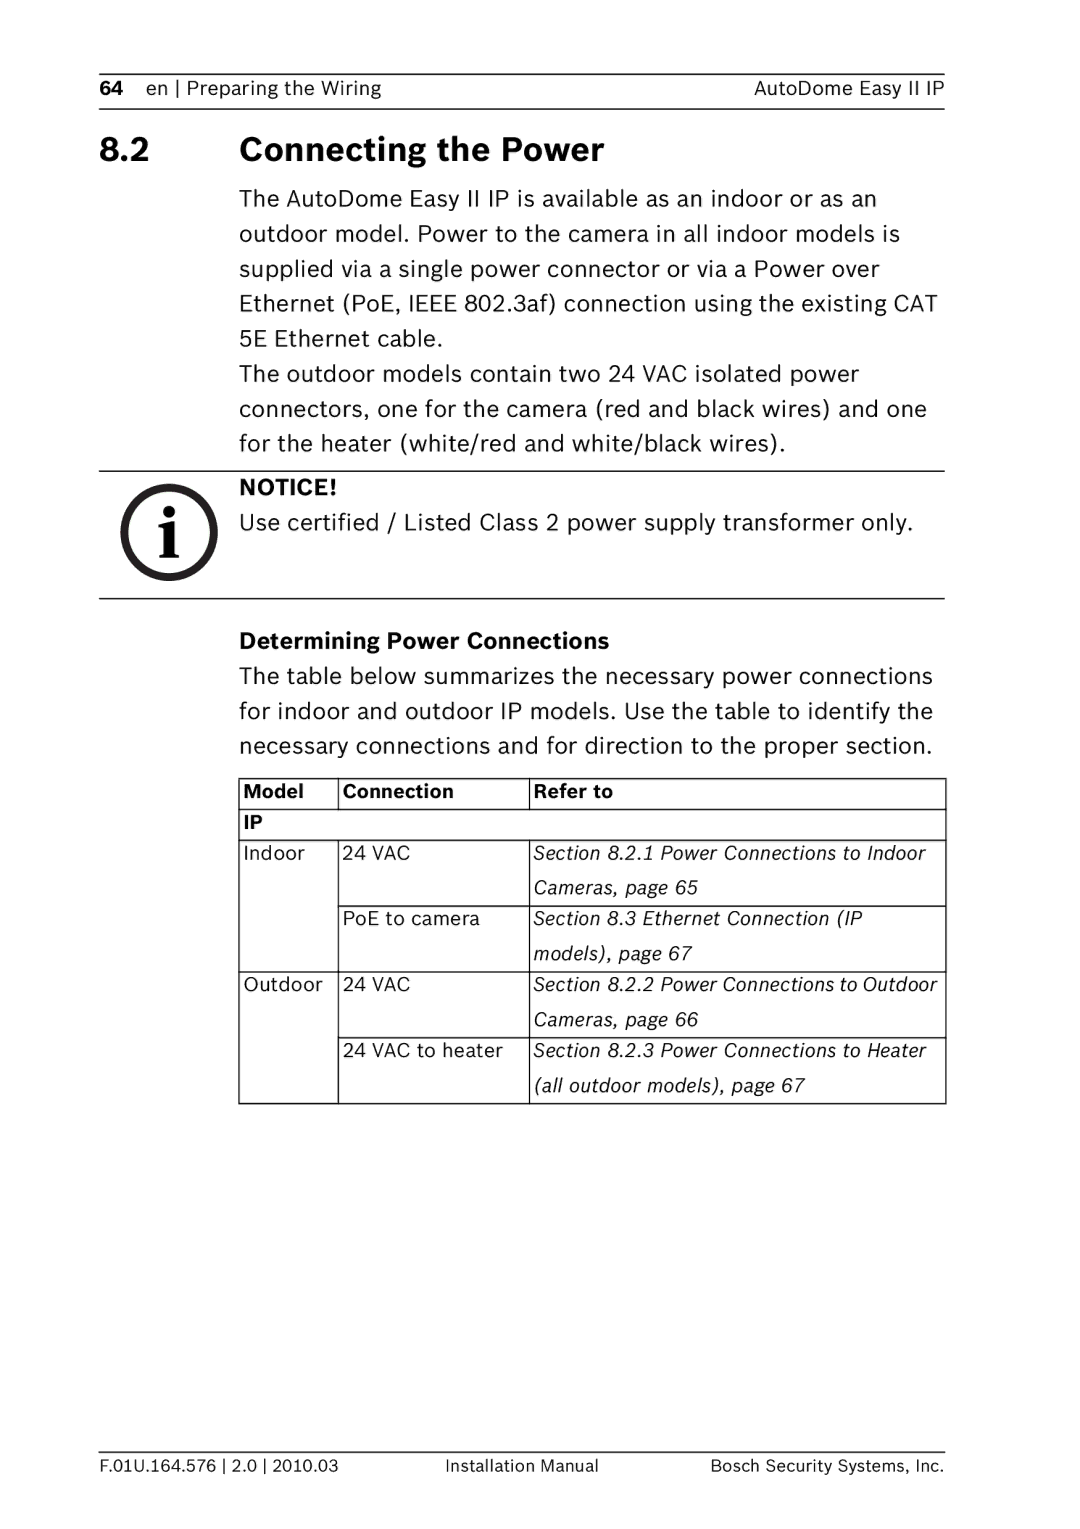 Bosch Appliances VEZ installation manual Connecting the Power, Determining Power Connections 